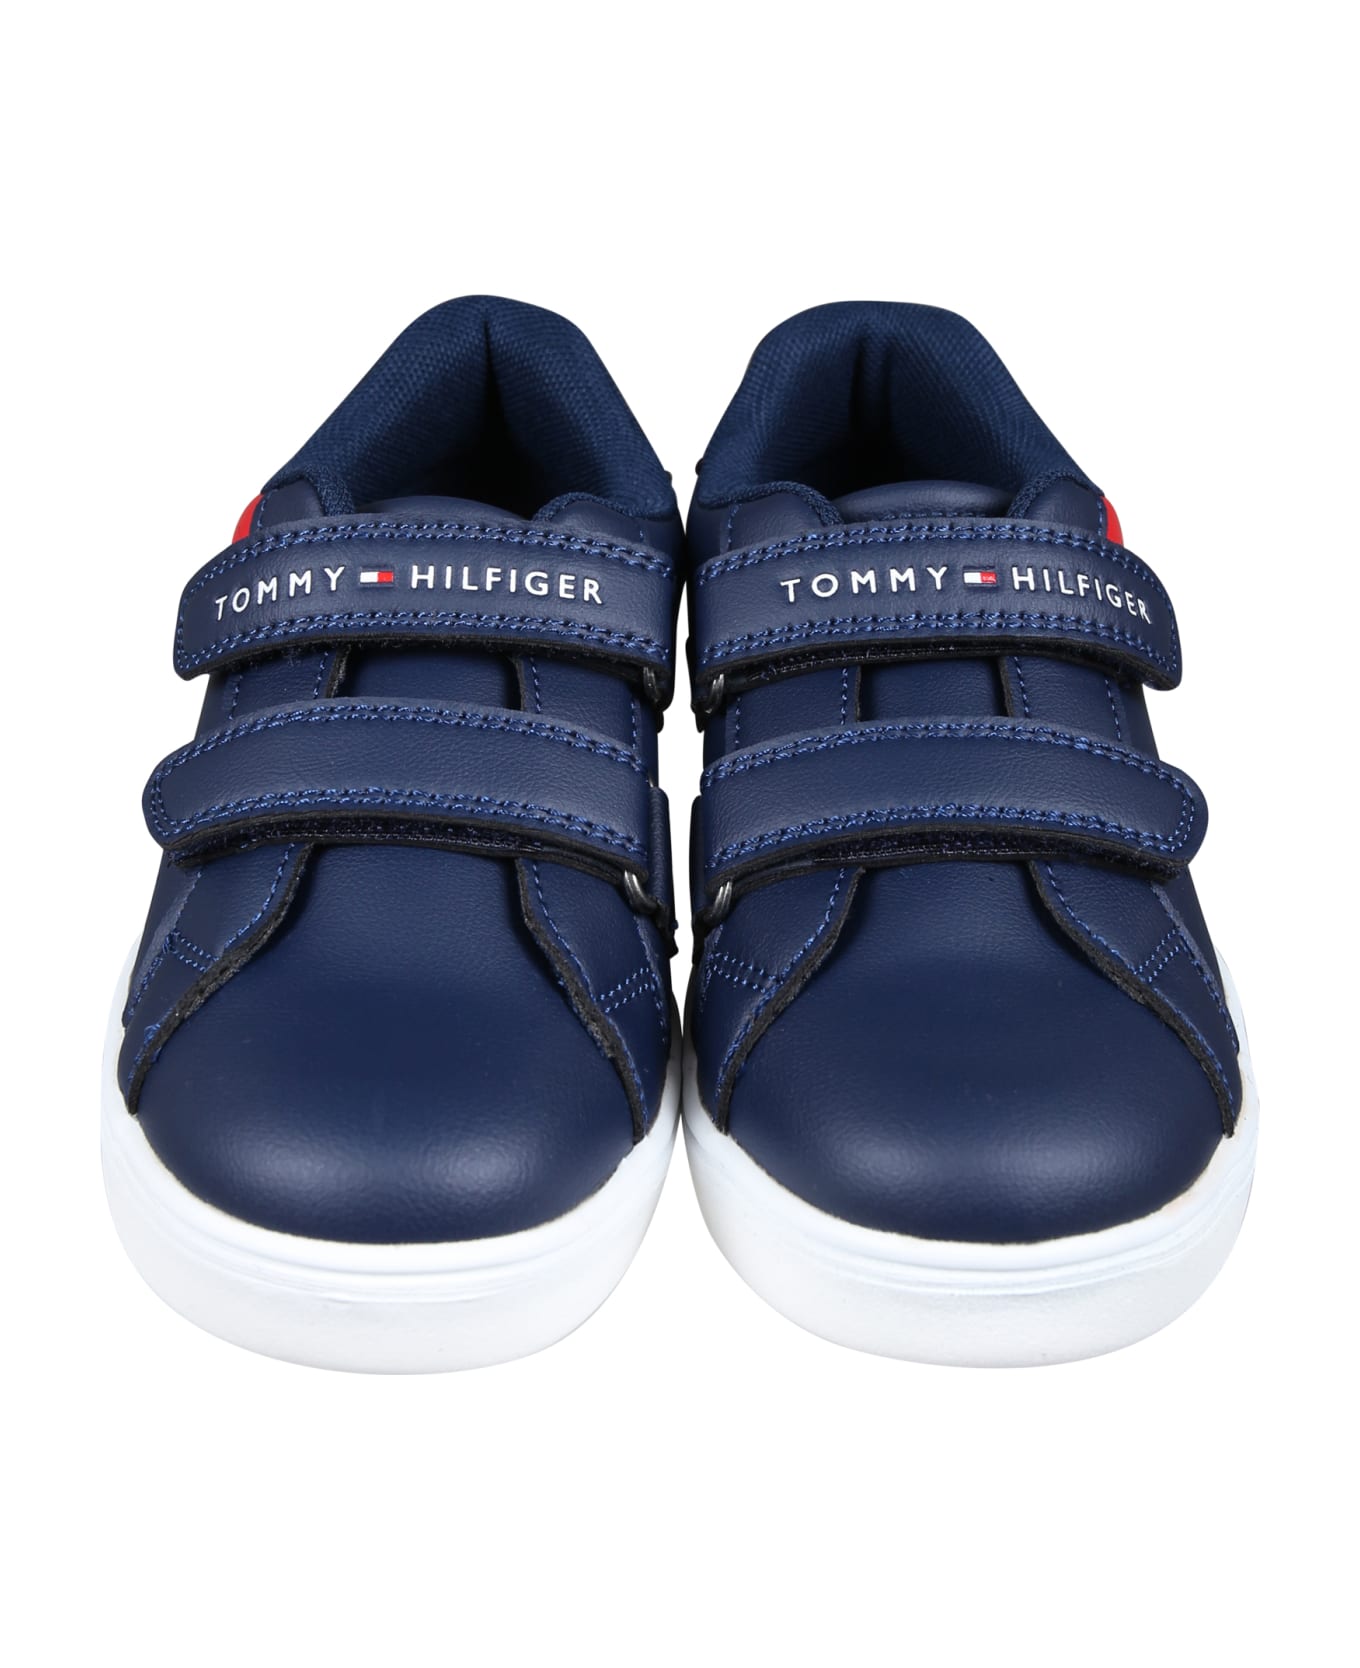 Tommy Hilfiger Blue Sneakers For Kids With Flag And Logo - Blue